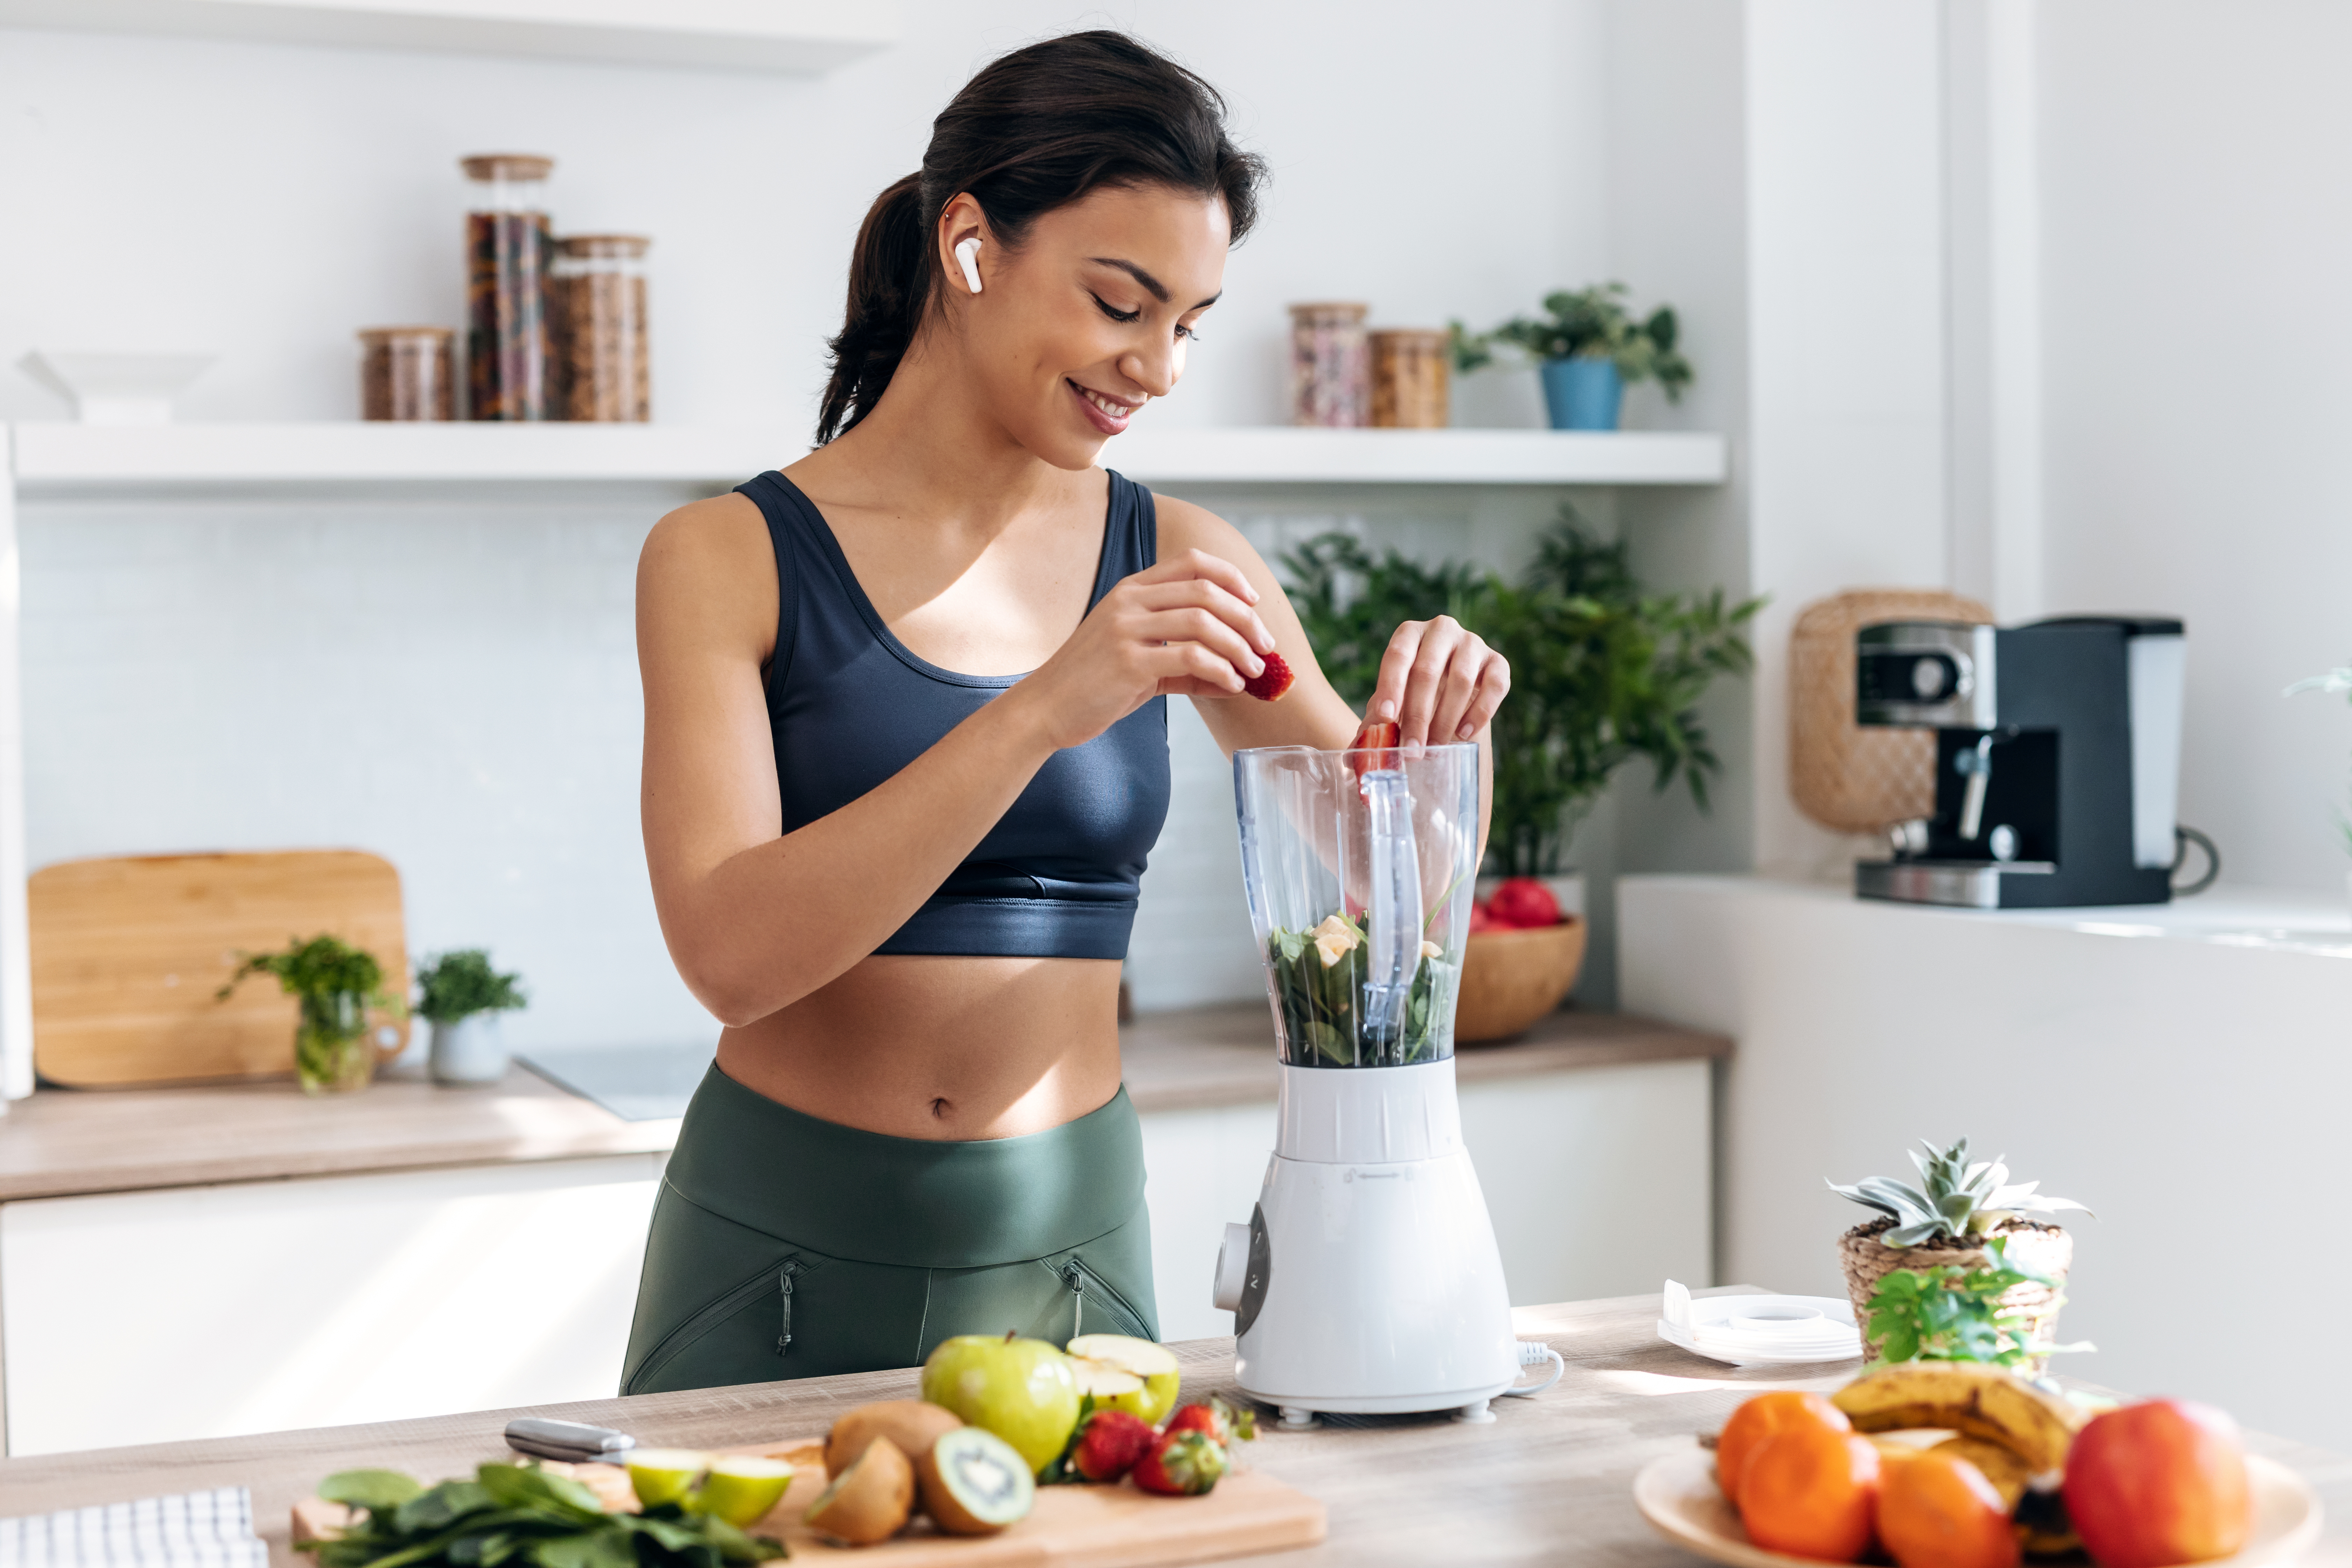 Shot of athletic woman preparing smothie with vegetables and fruits while listening music with earphones in the kitchen at home.